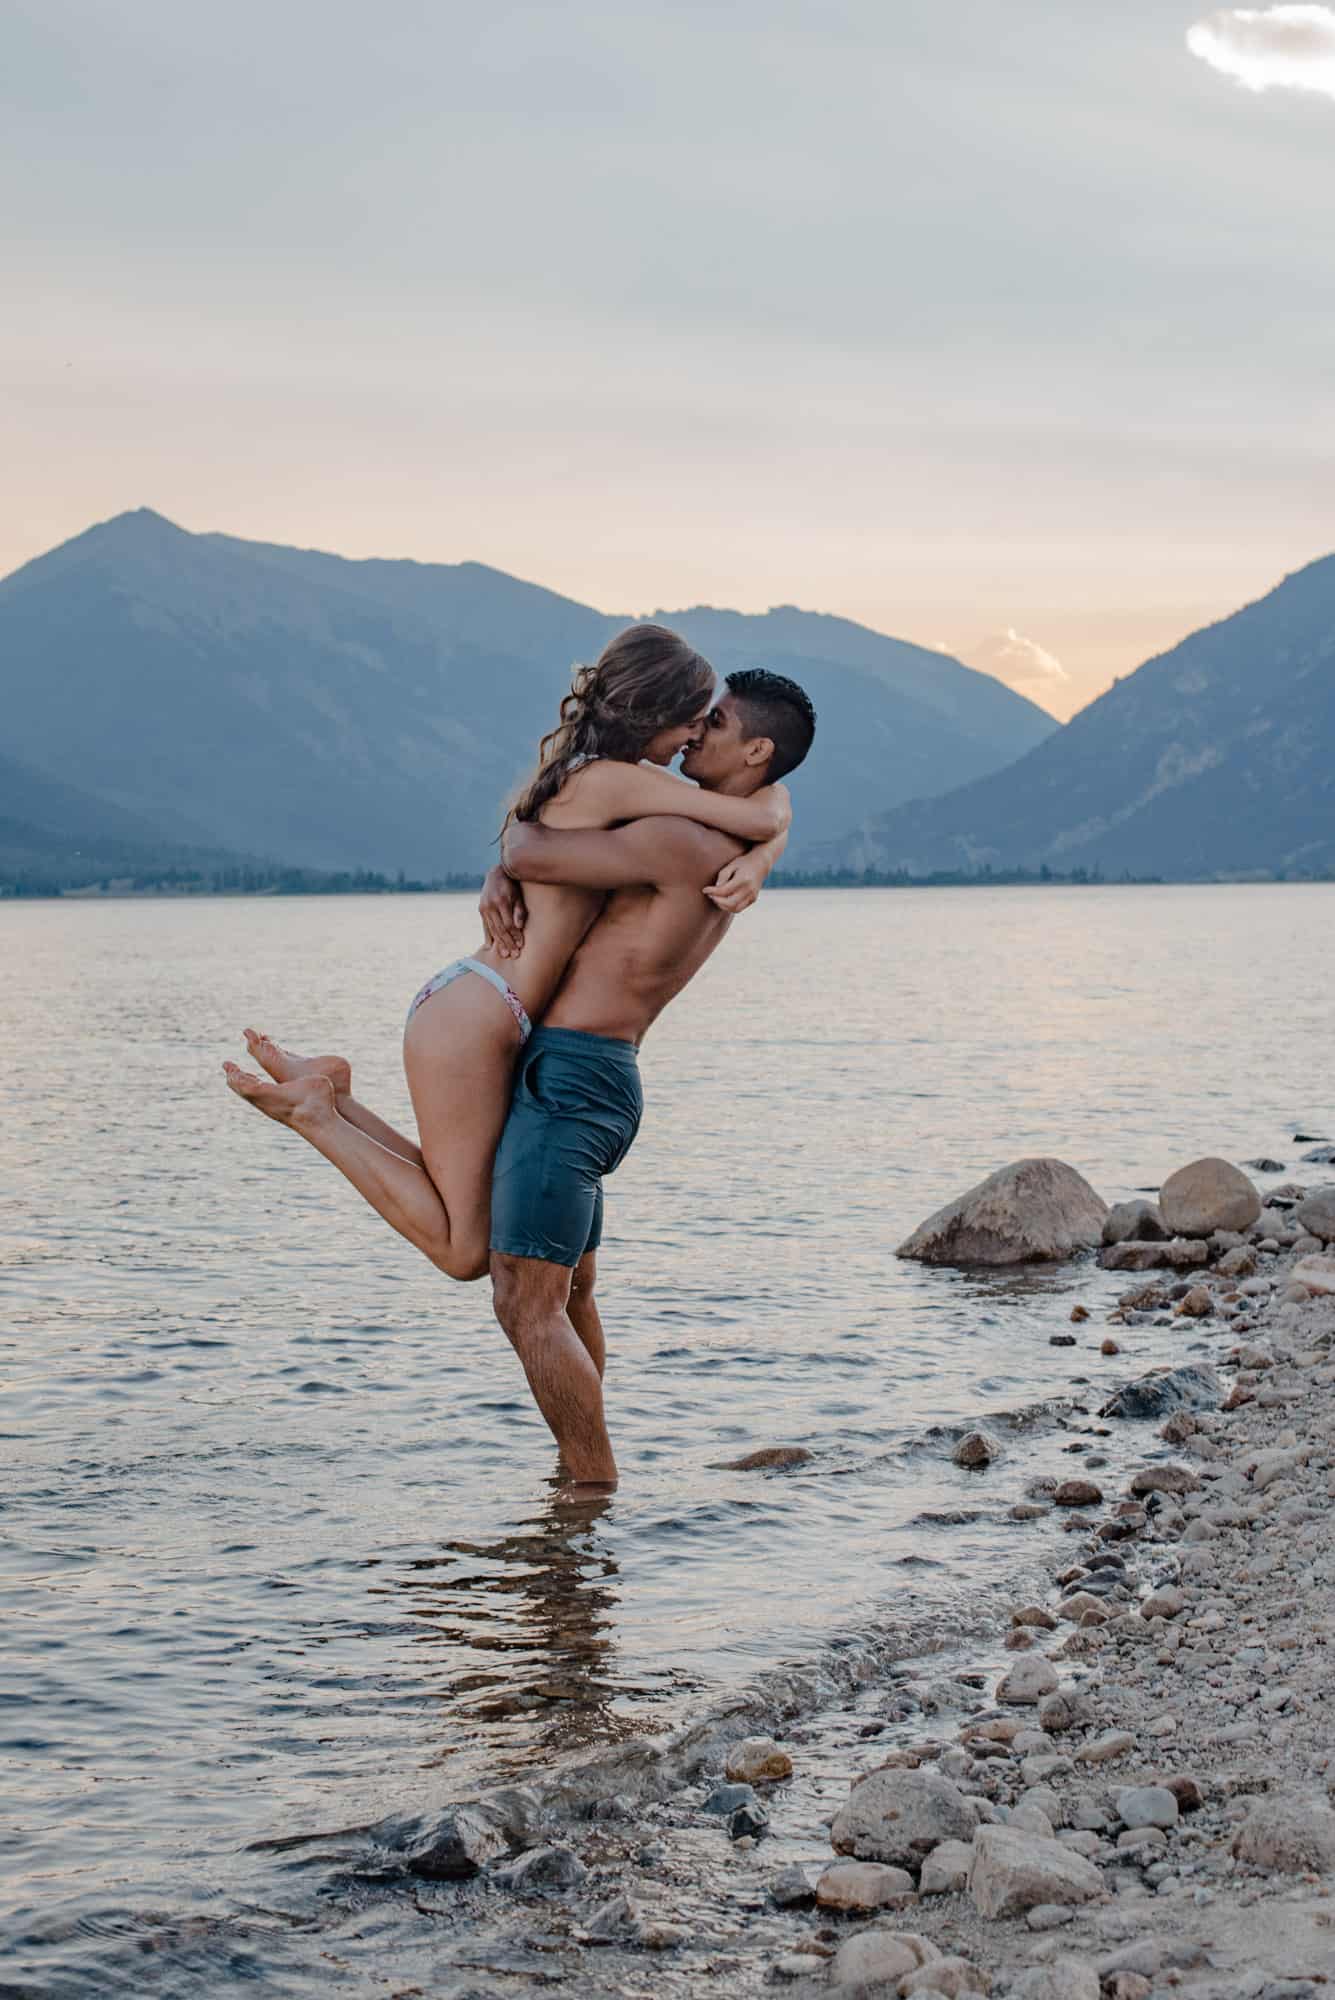 female being lifted out of an alpine lake by male holding her up as her hands are wrapped around his neck and the sun has set behind them, joyful for following this simple proposal idea and denver proposal idea list to have a magical time together